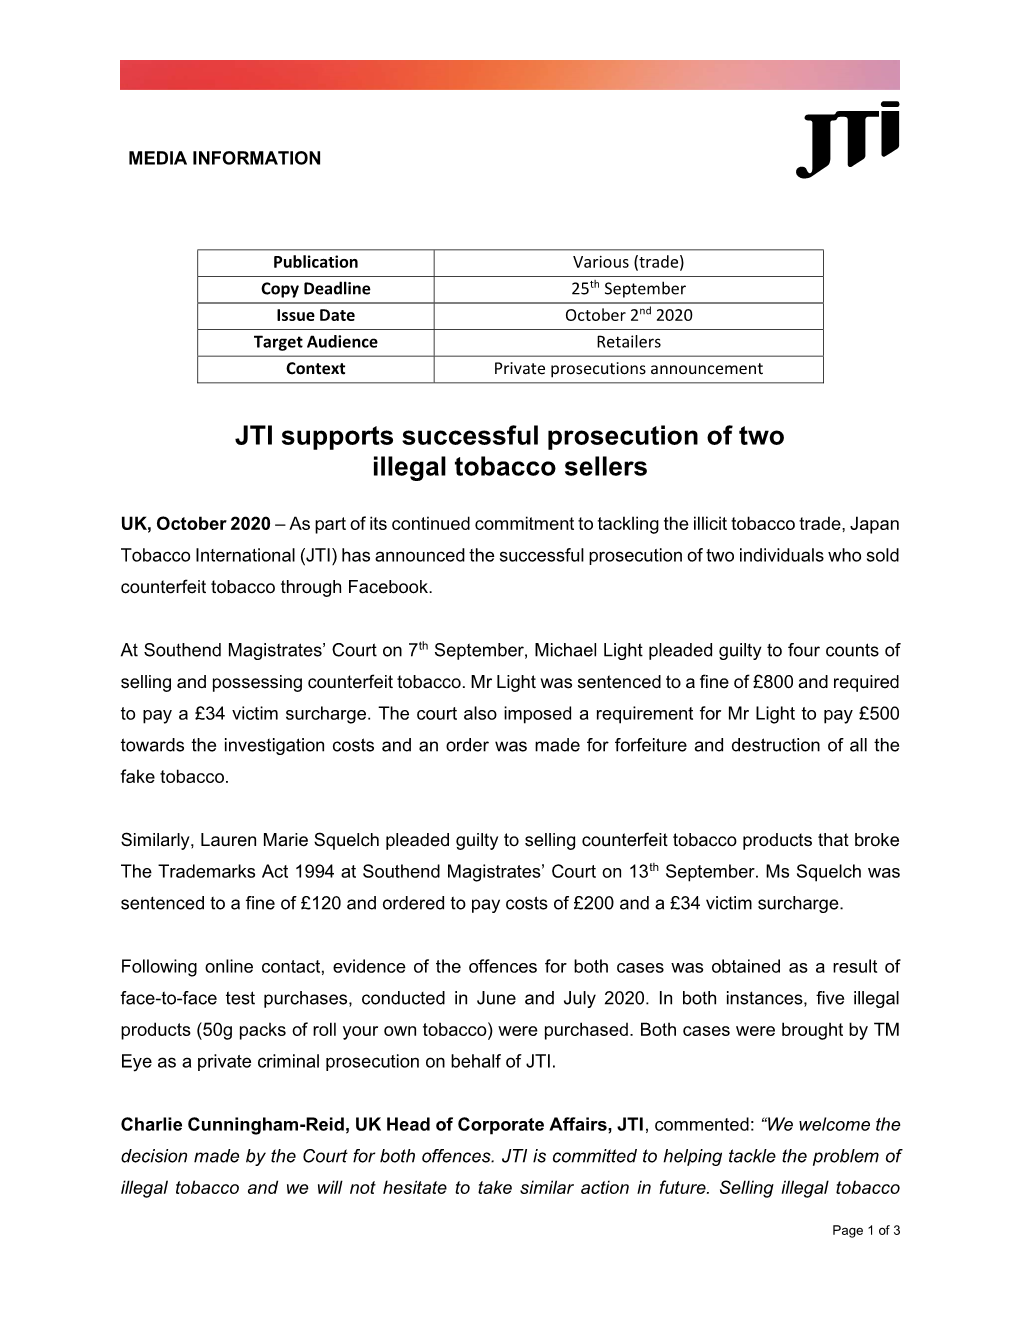 JTI Supports Successful Prosecution of Two Illegal Tobacco Sellers